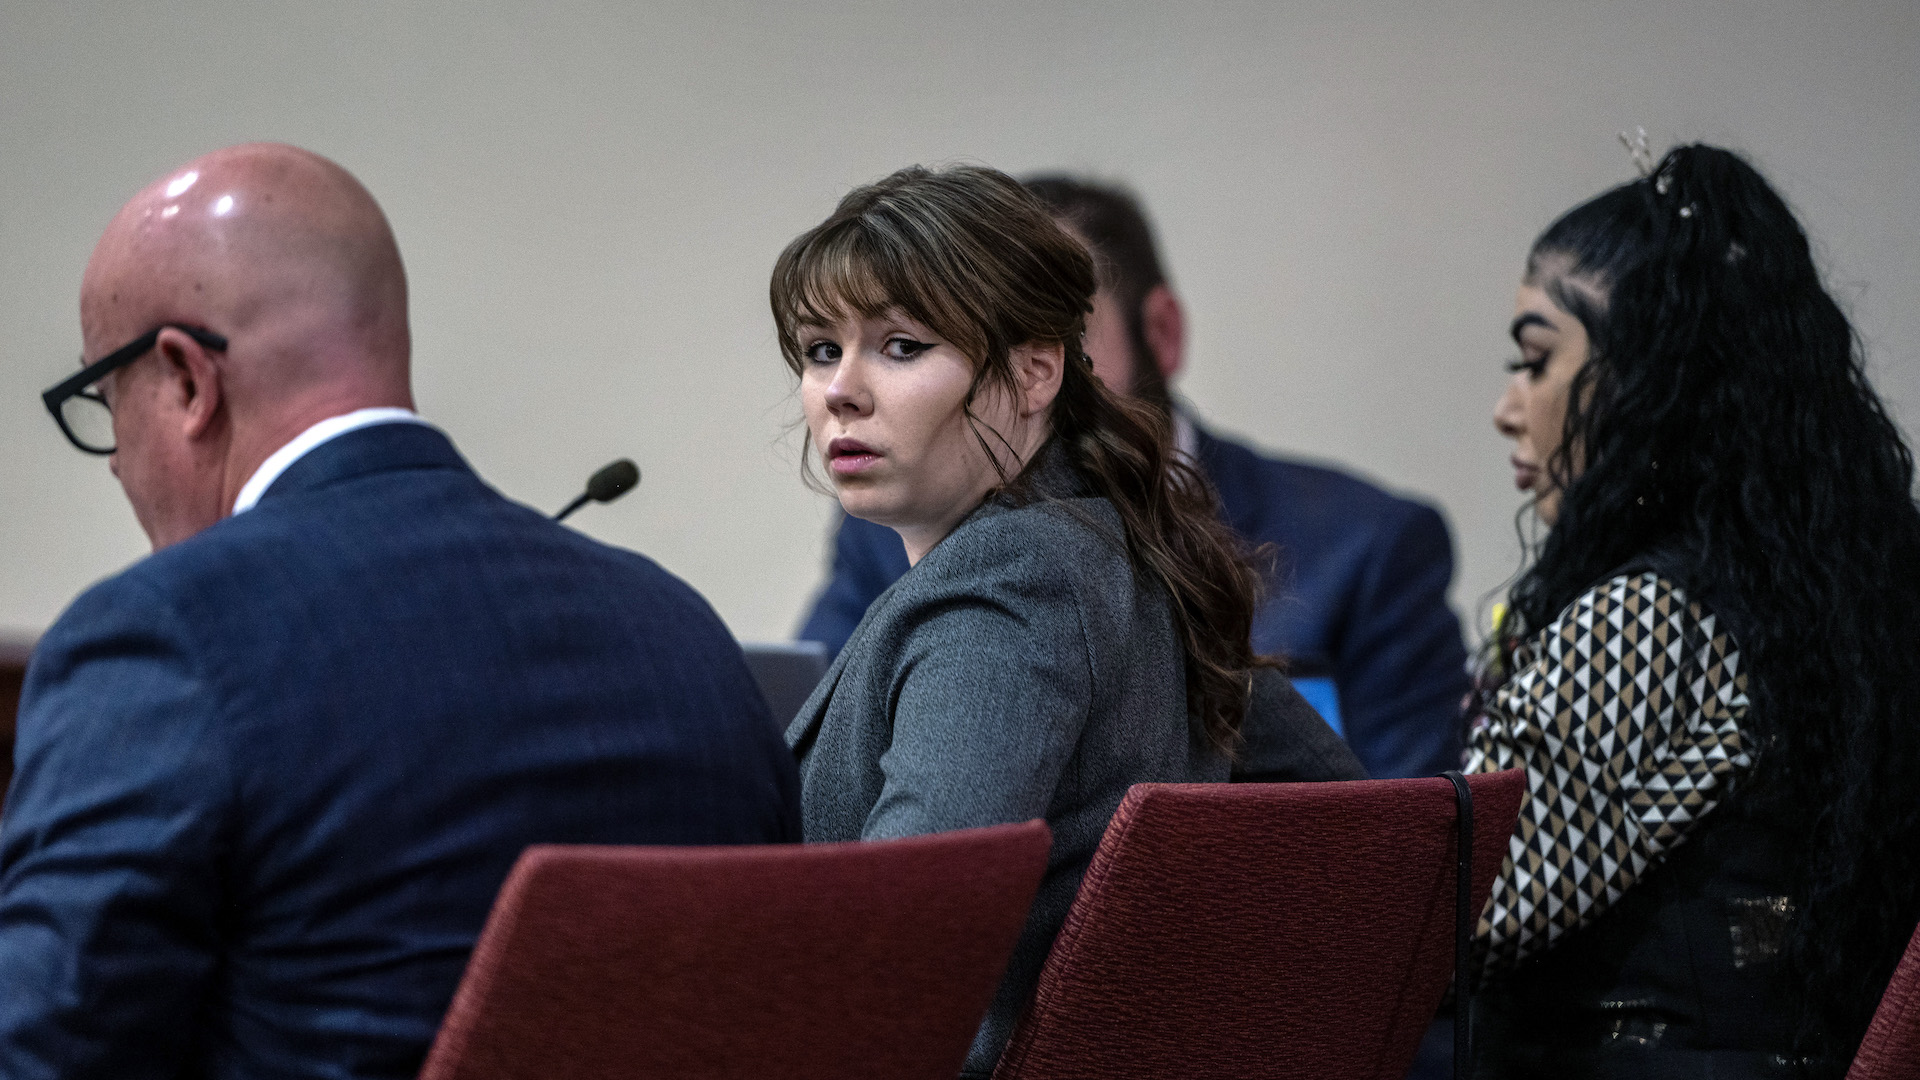 Hannah Gutierrez-Reed, center, sits with her attorney Jason Bowles, left, during the first day of testimony in the trial against her in First District Court, in Santa Fe, N.M., Thursday, February 22, 2024. Gutierrez-Reed, who was working as the armorer on the movie 